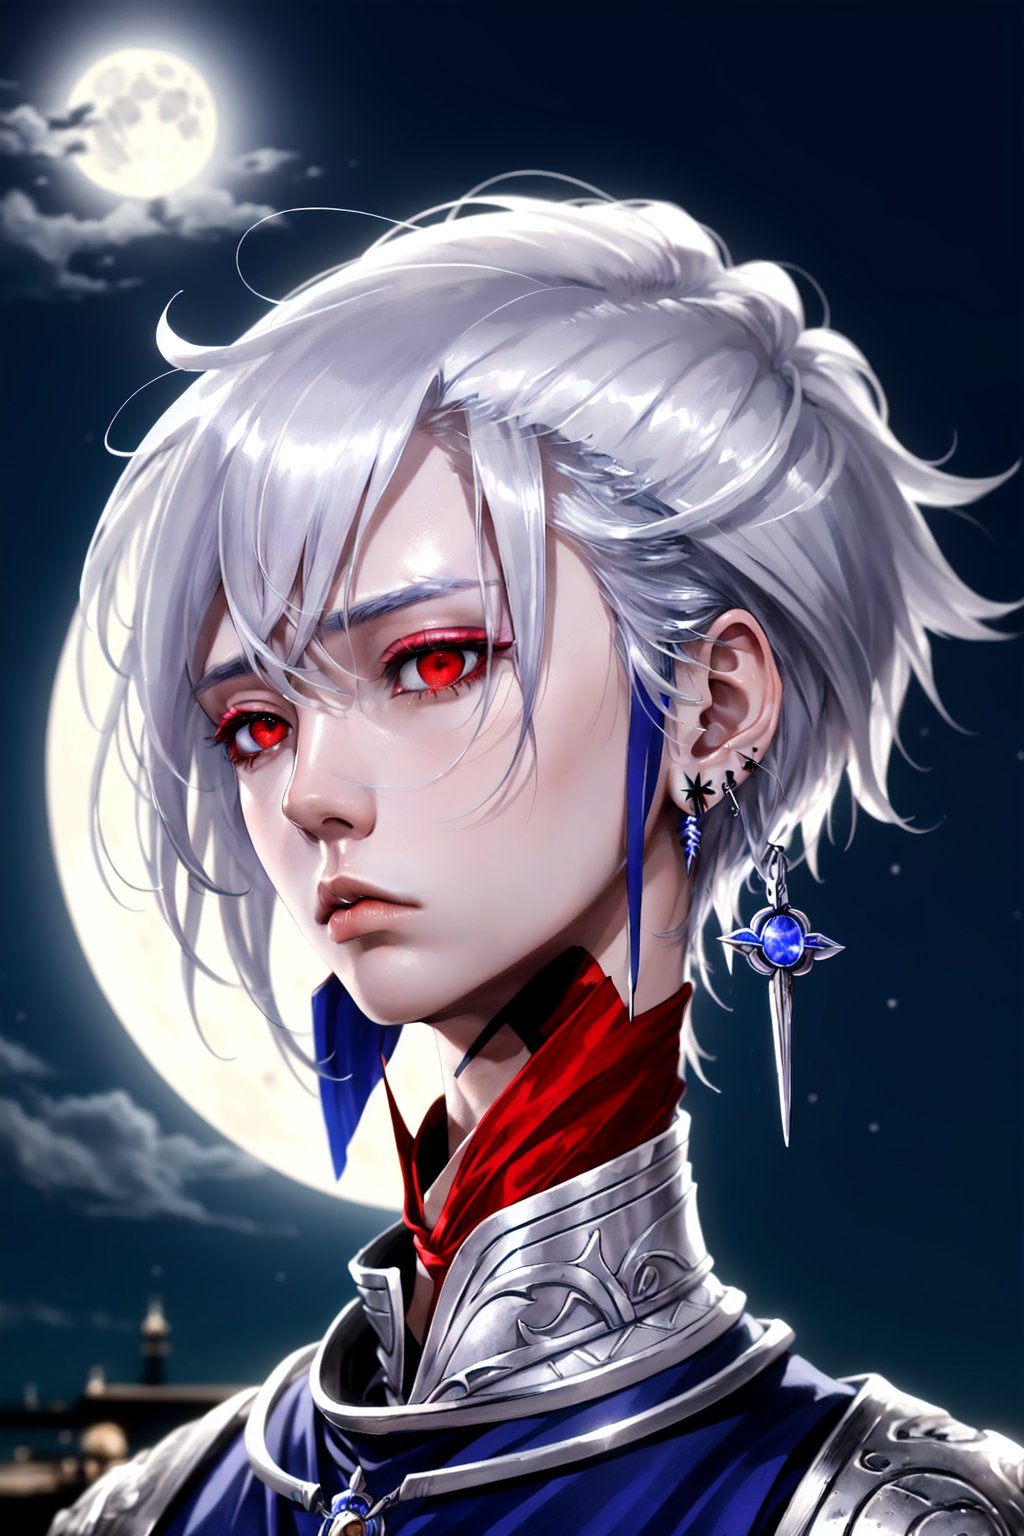 moonlight warrior boy with silver hair highest quality clean art detalised perfect rendering proffesional art aesthetic moon earring manly face manly jaw pretty nose manly anatomy cold emotionless red eyes hyperdetailed ethereal aesthetic
